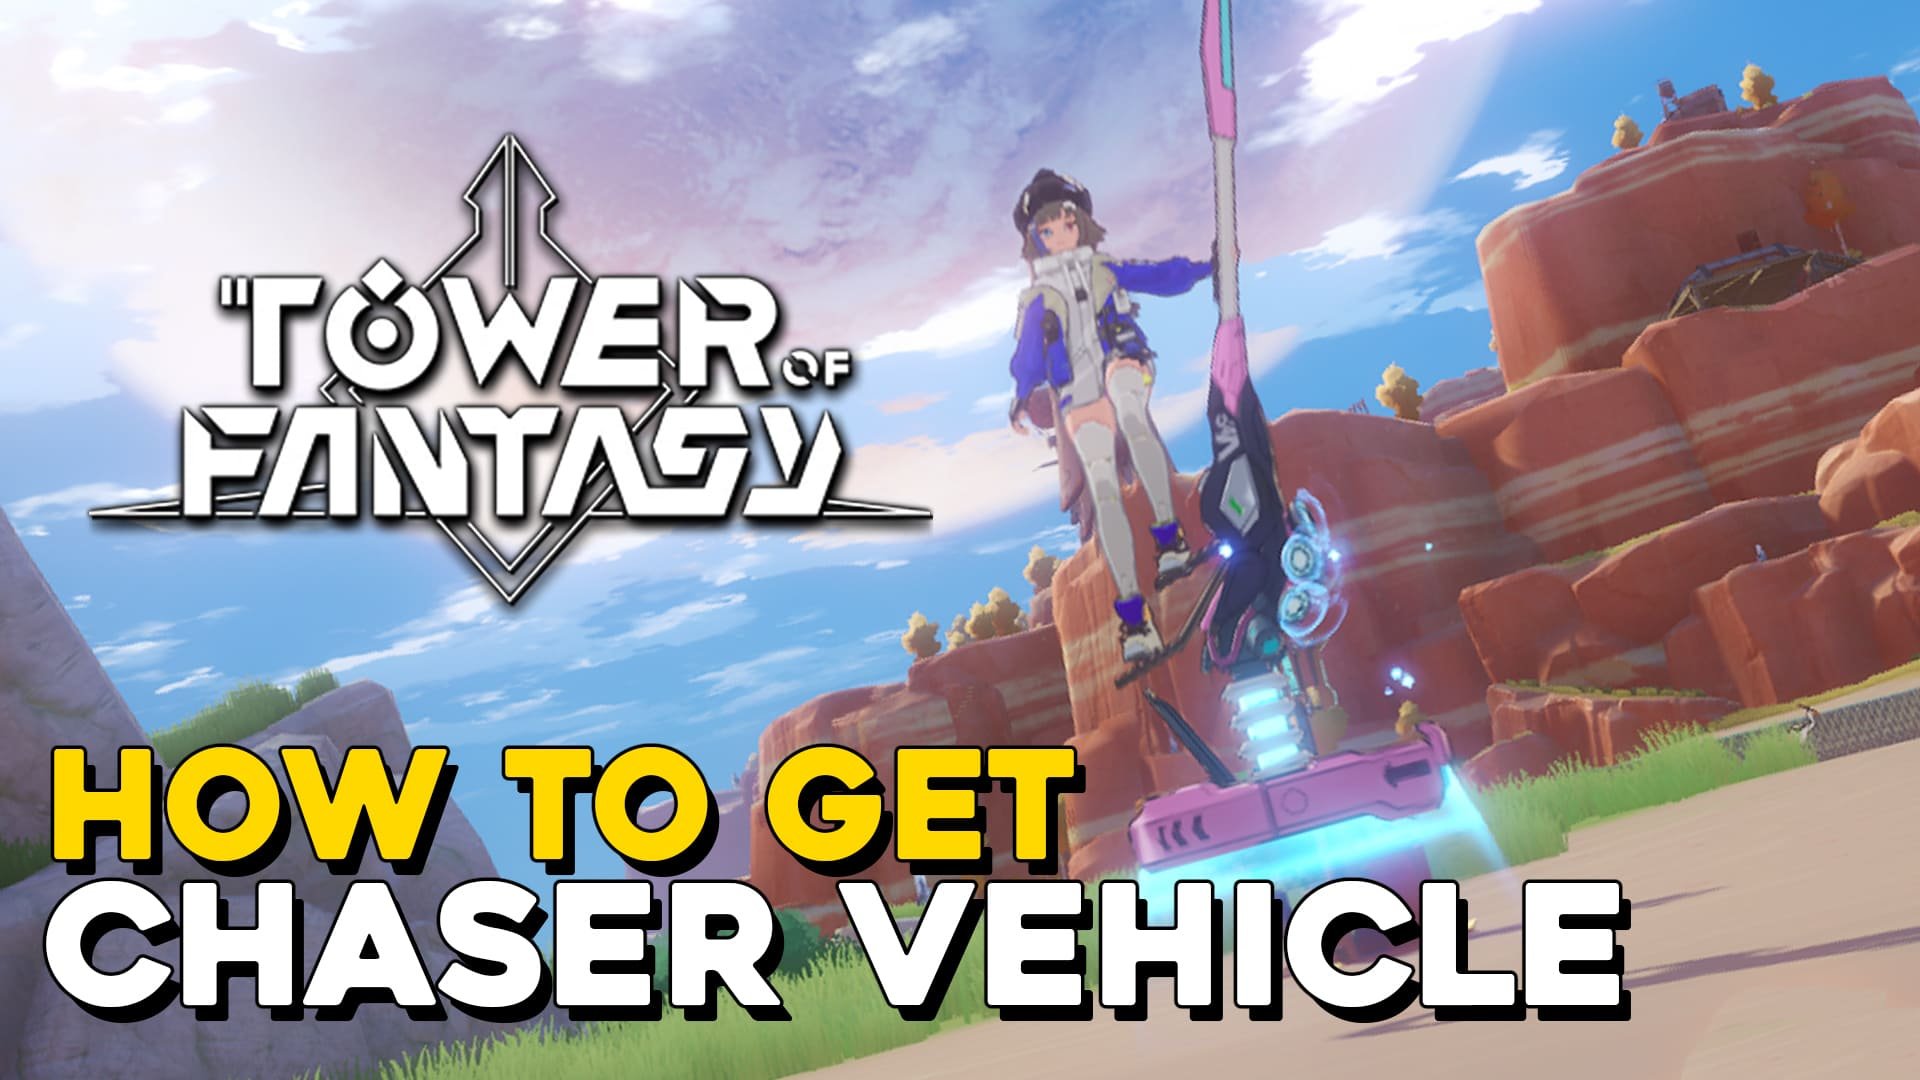 Tower Of Fantasy How To Get Chaser Vehicle.jpg